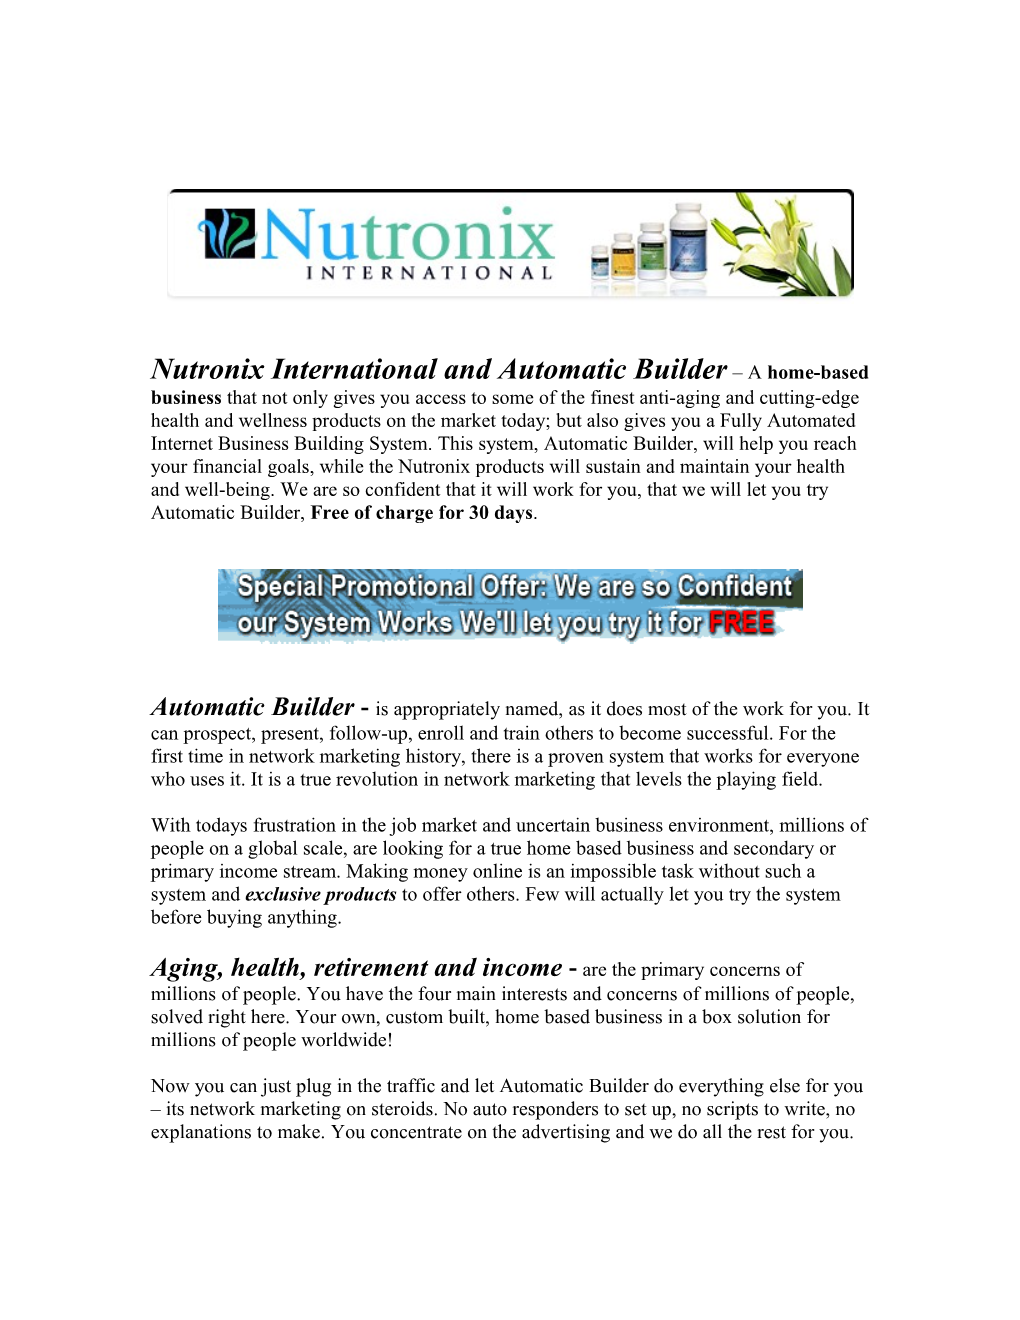 Welcome to Nutronix International and Automaticbuilder